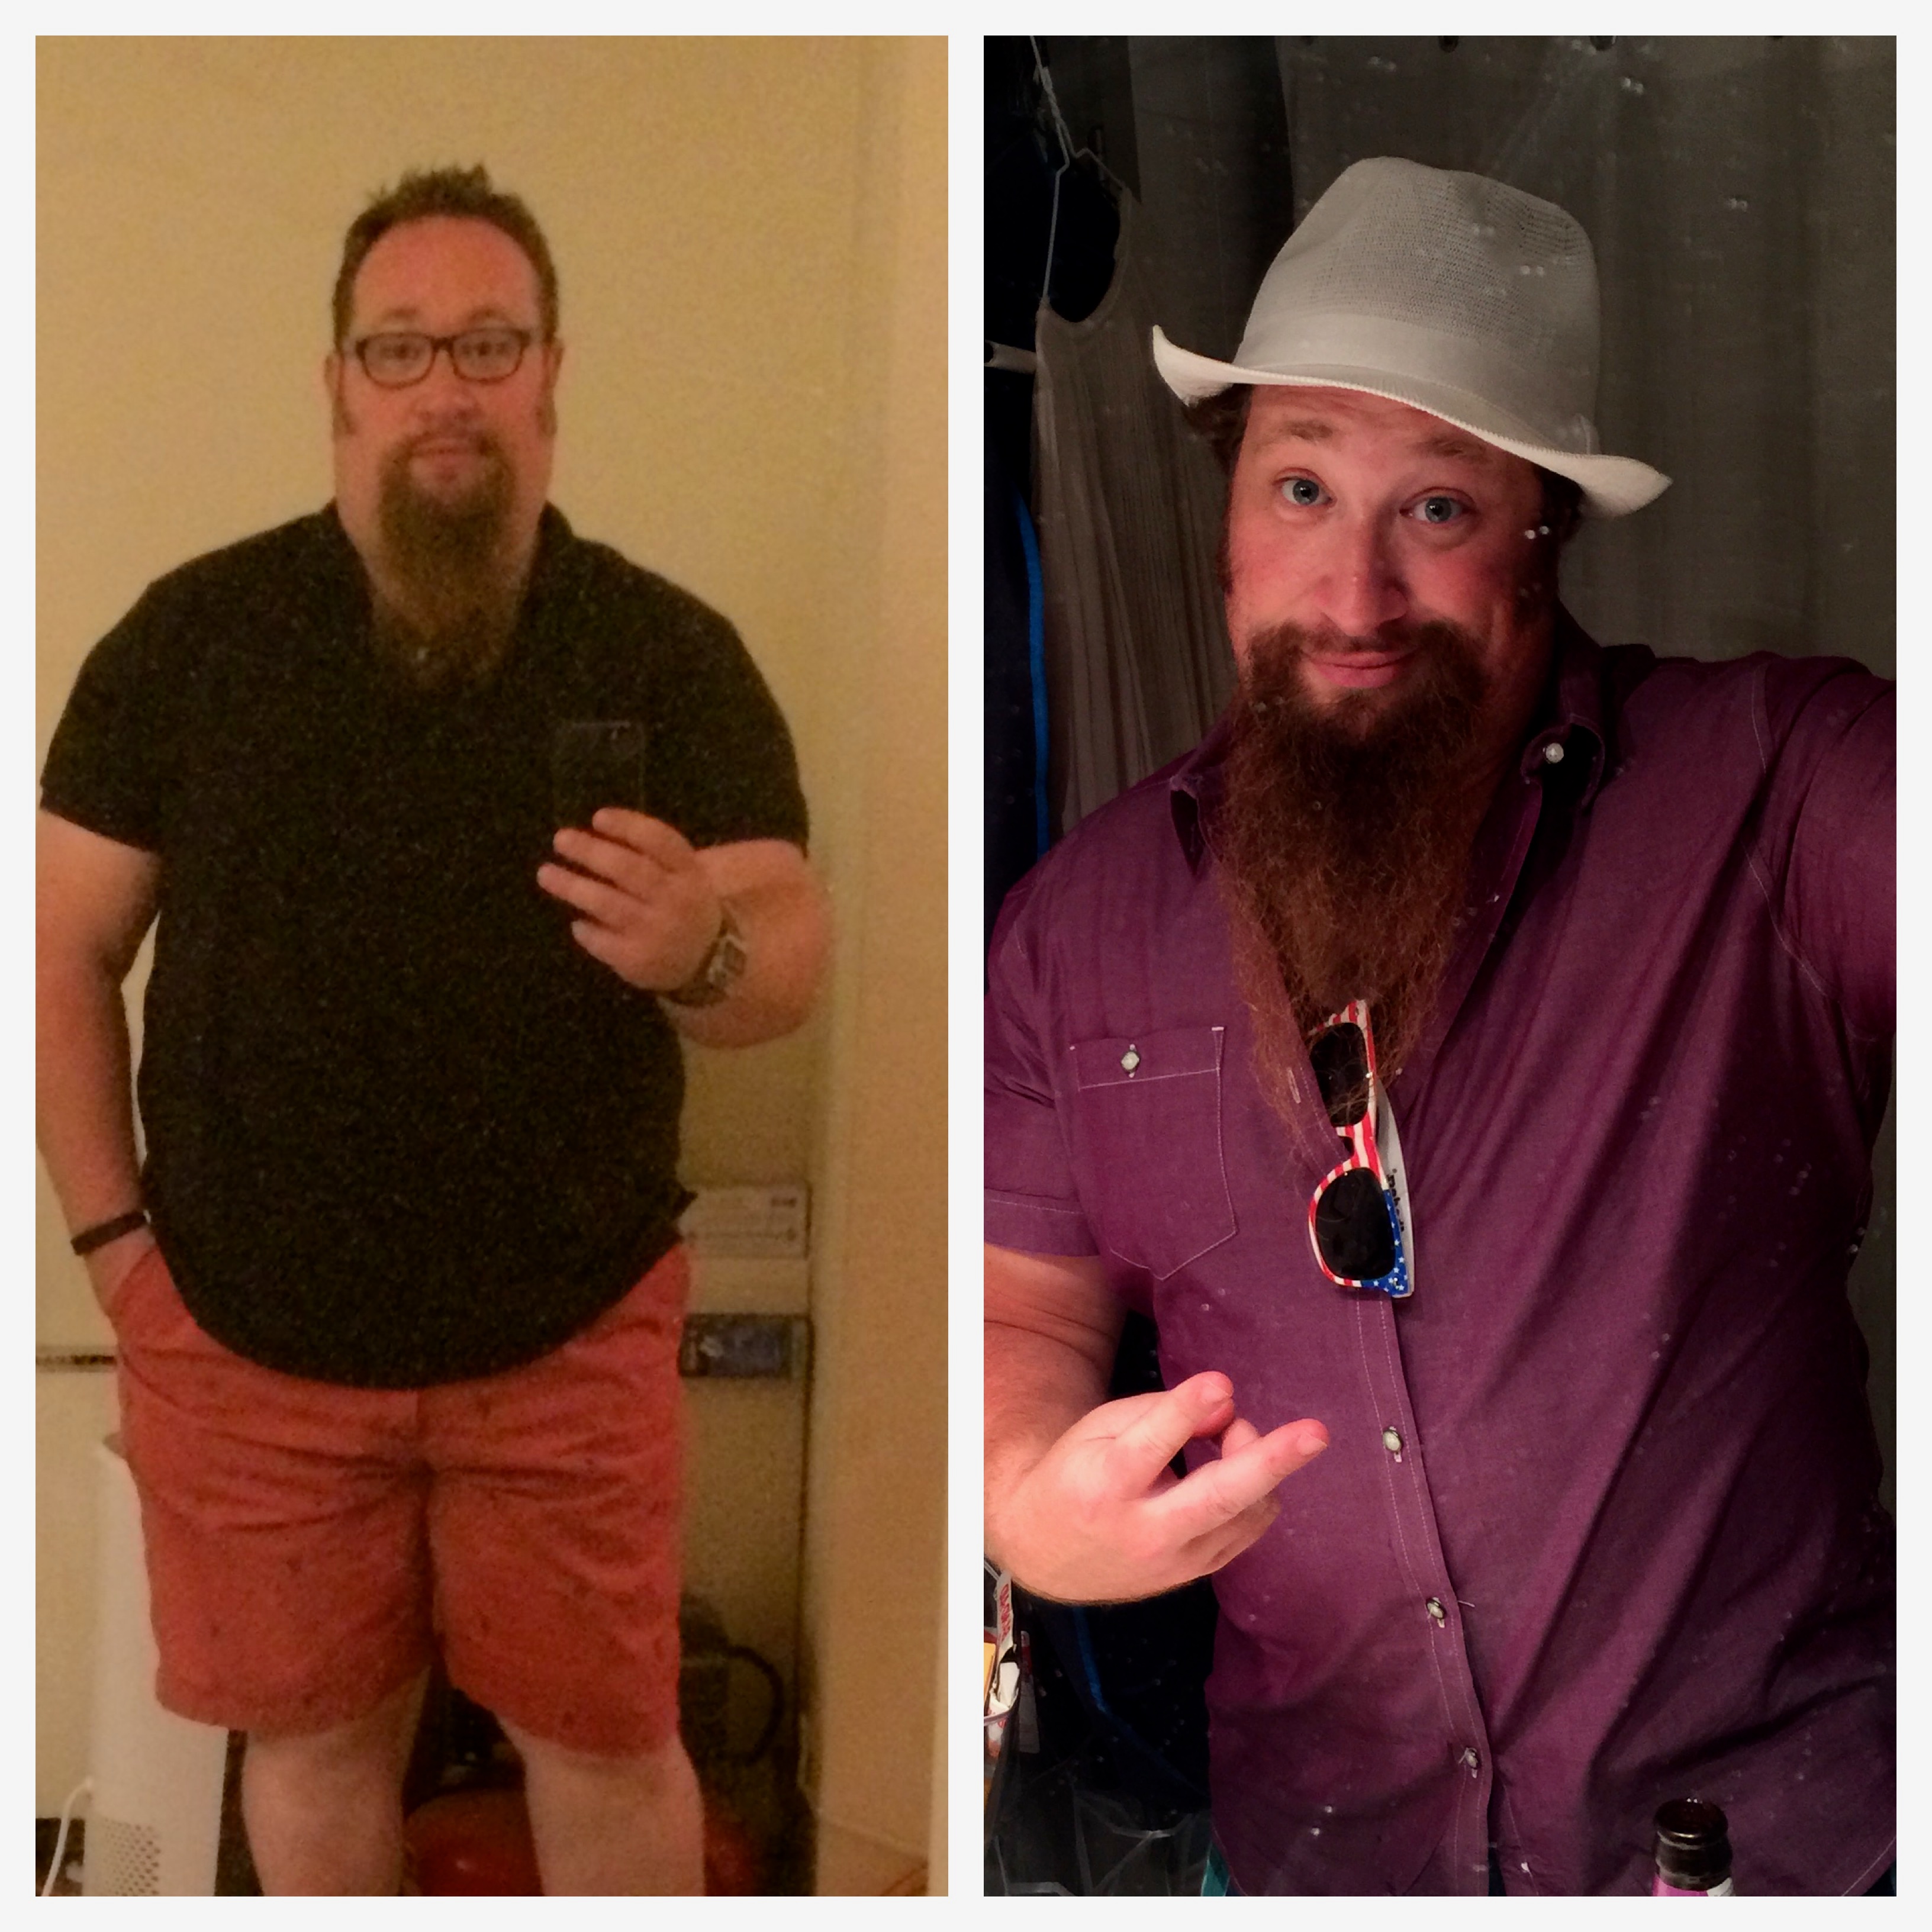 365 Days of Fun, 75 Pounds of a New Life. Thank You.